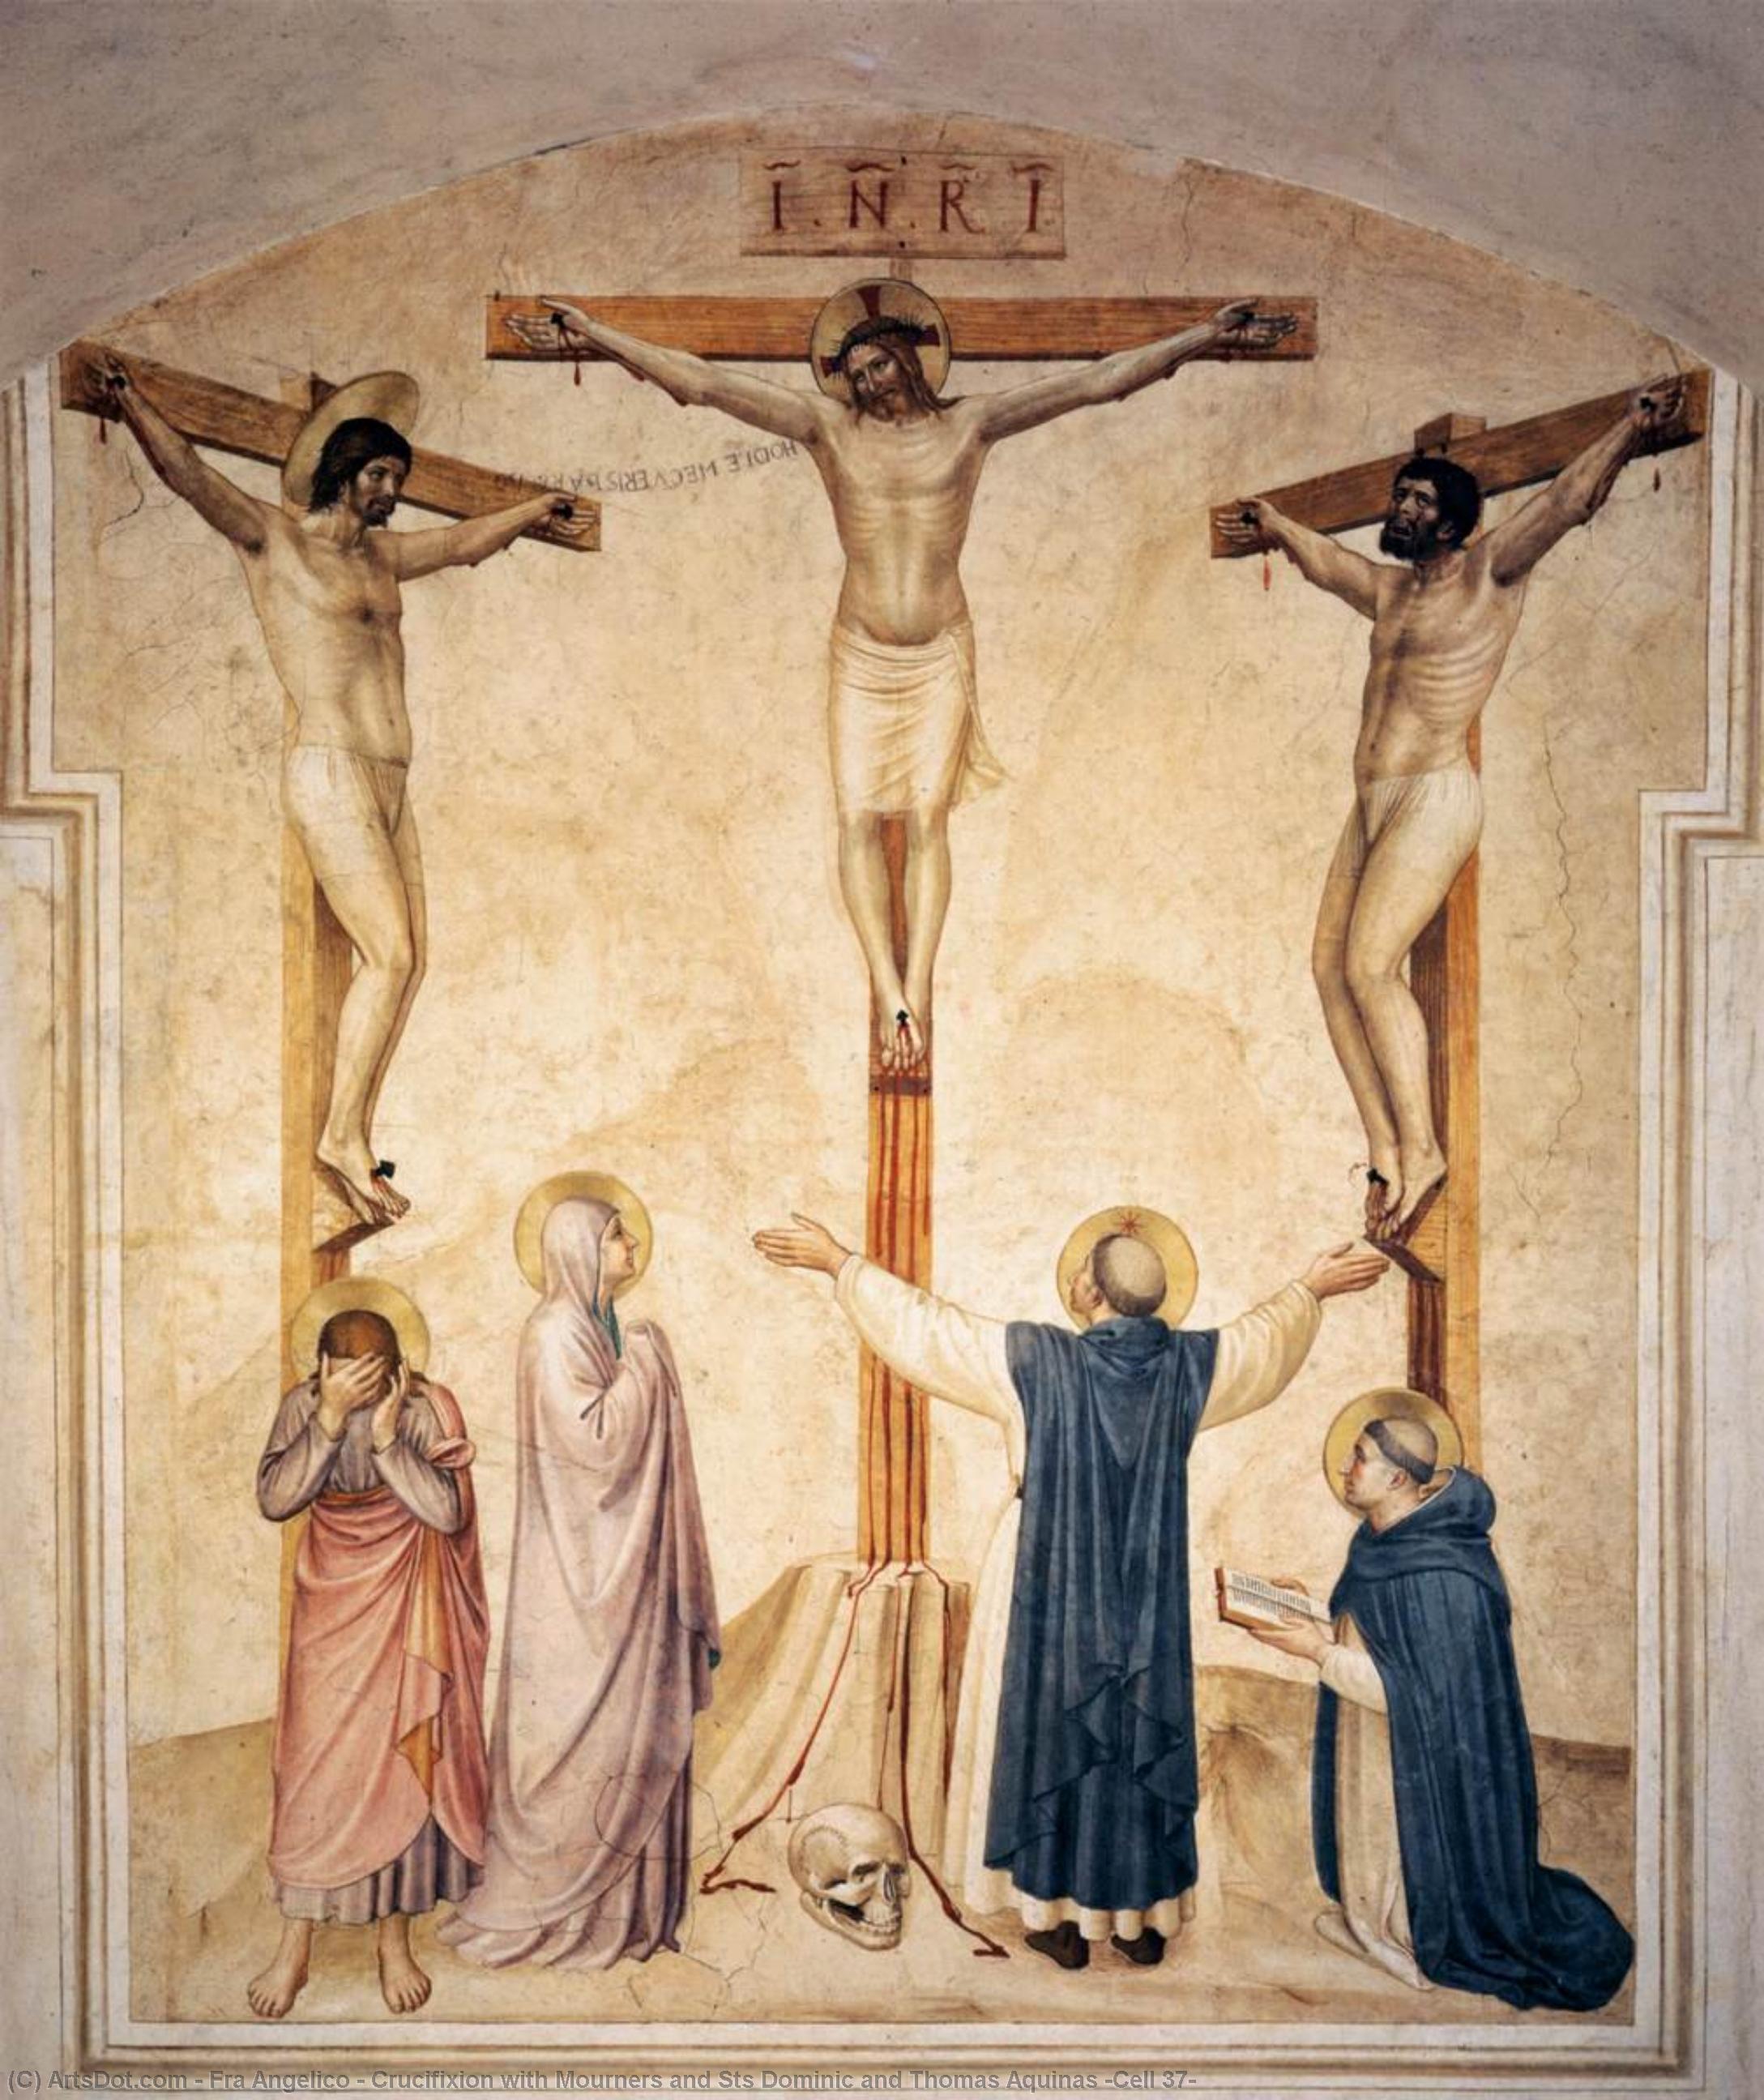 WikiOO.org - Encyclopedia of Fine Arts - Maleri, Artwork Fra Angelico - Crucifixion with Mourners and Sts Dominic and Thomas Aquinas (Cell 37)